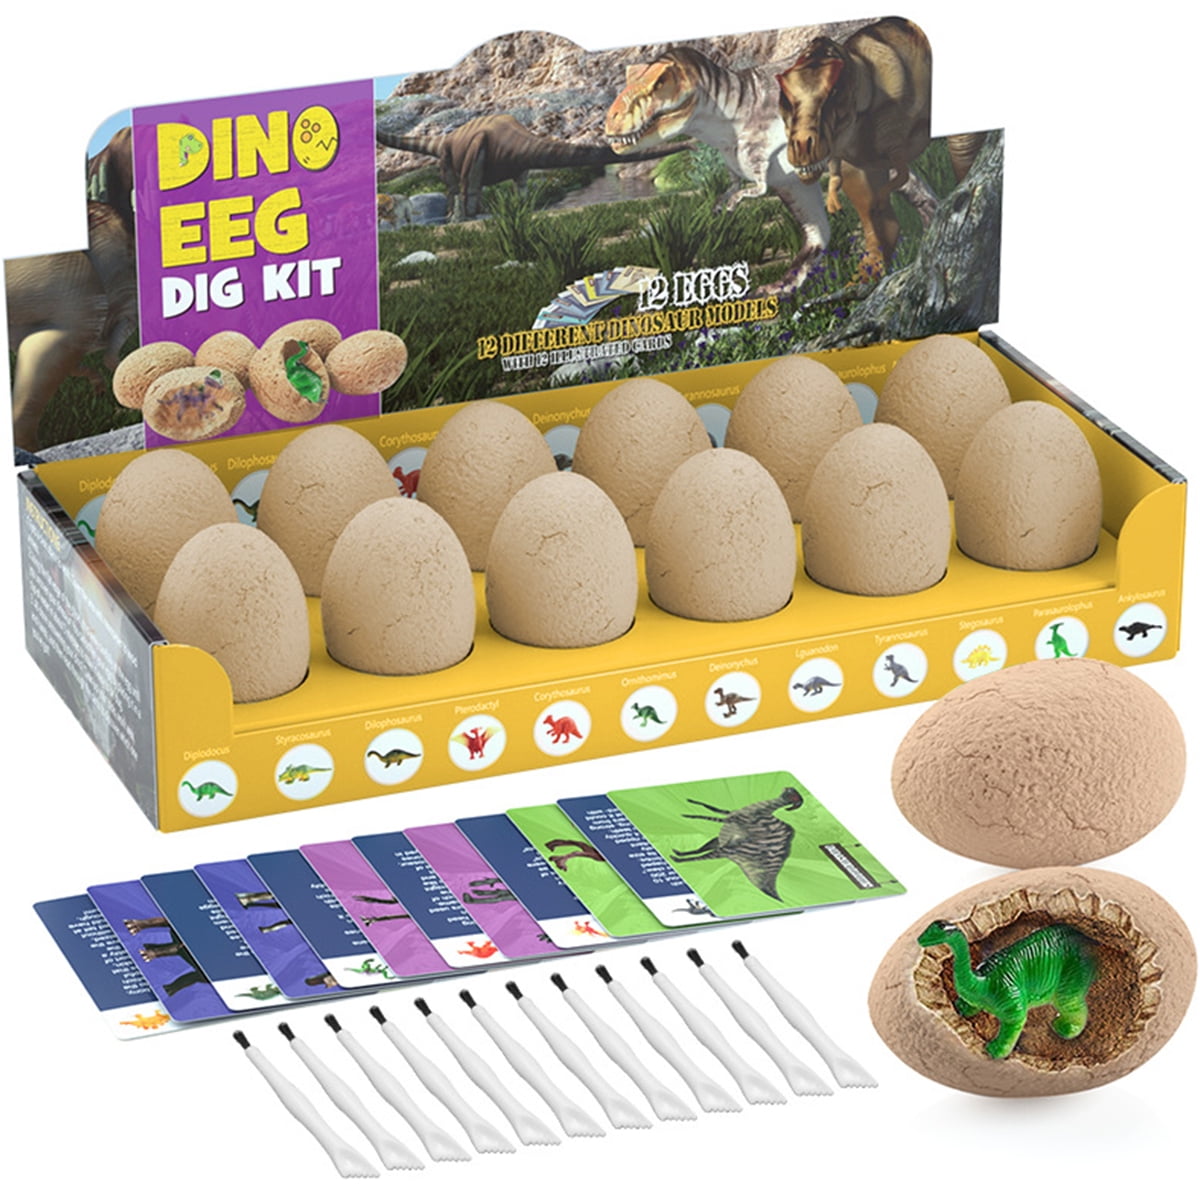 Dropship Dinosaur Eggs - Dino Egg Dig Kit Dinosaur Toys For Kids; Easter  Eggs Excavation Discover 12 Surprise Dinosaurs; Archaeology Science Kit  STEM Party Gifts For Boys & Girls to Sell Online